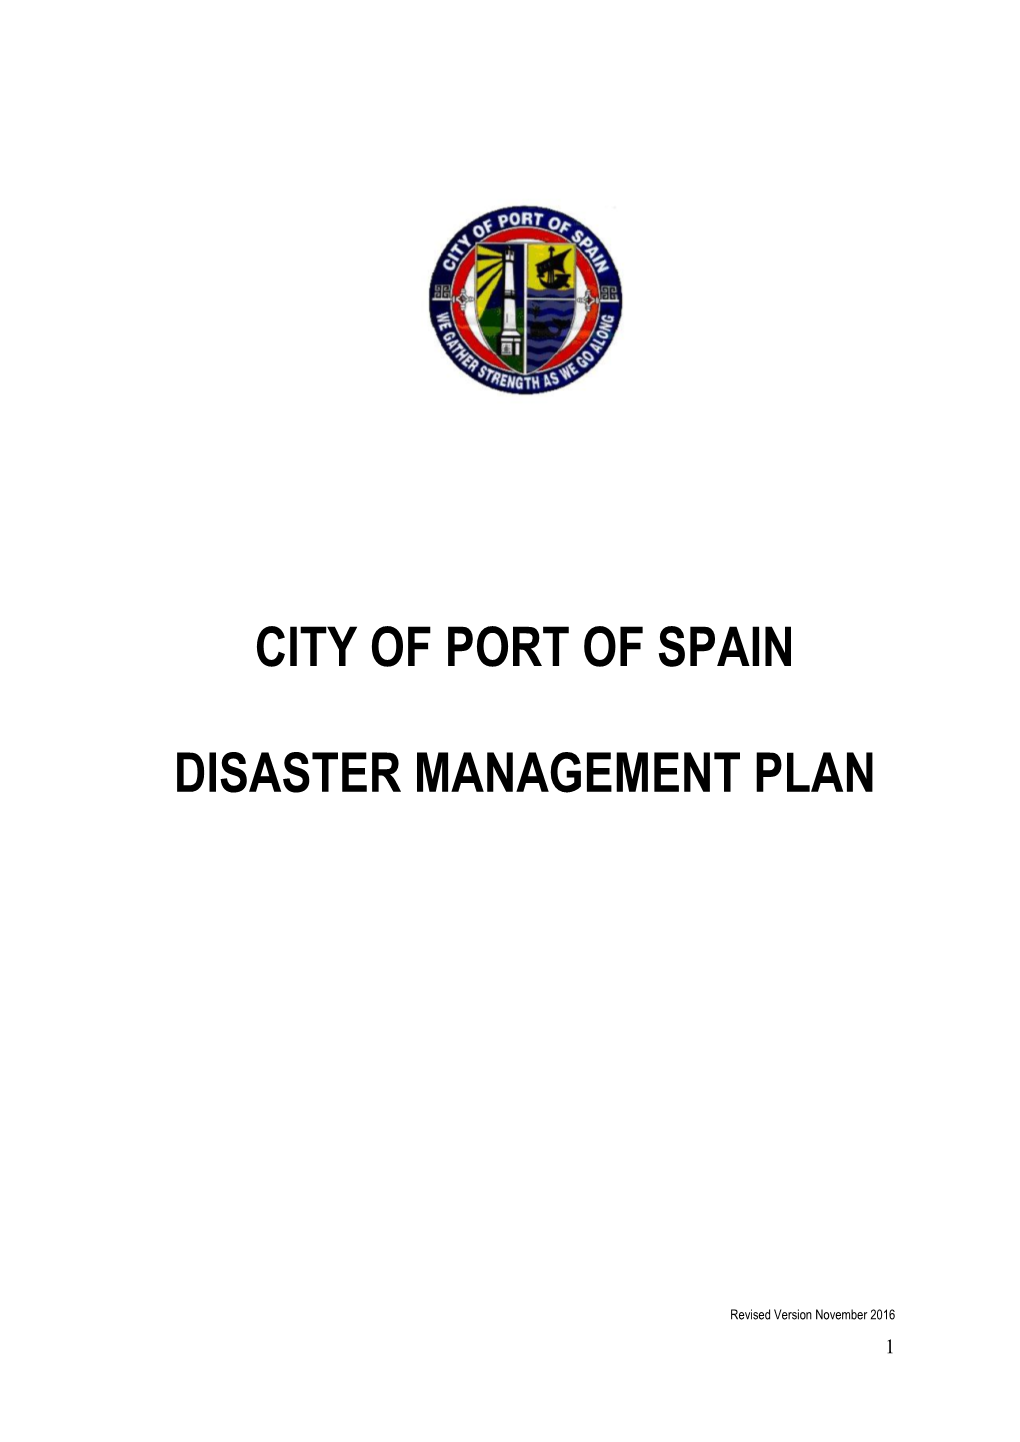 City of Port of Spain Disaster Management Plan Takes Precedence in the Event of a Conflict